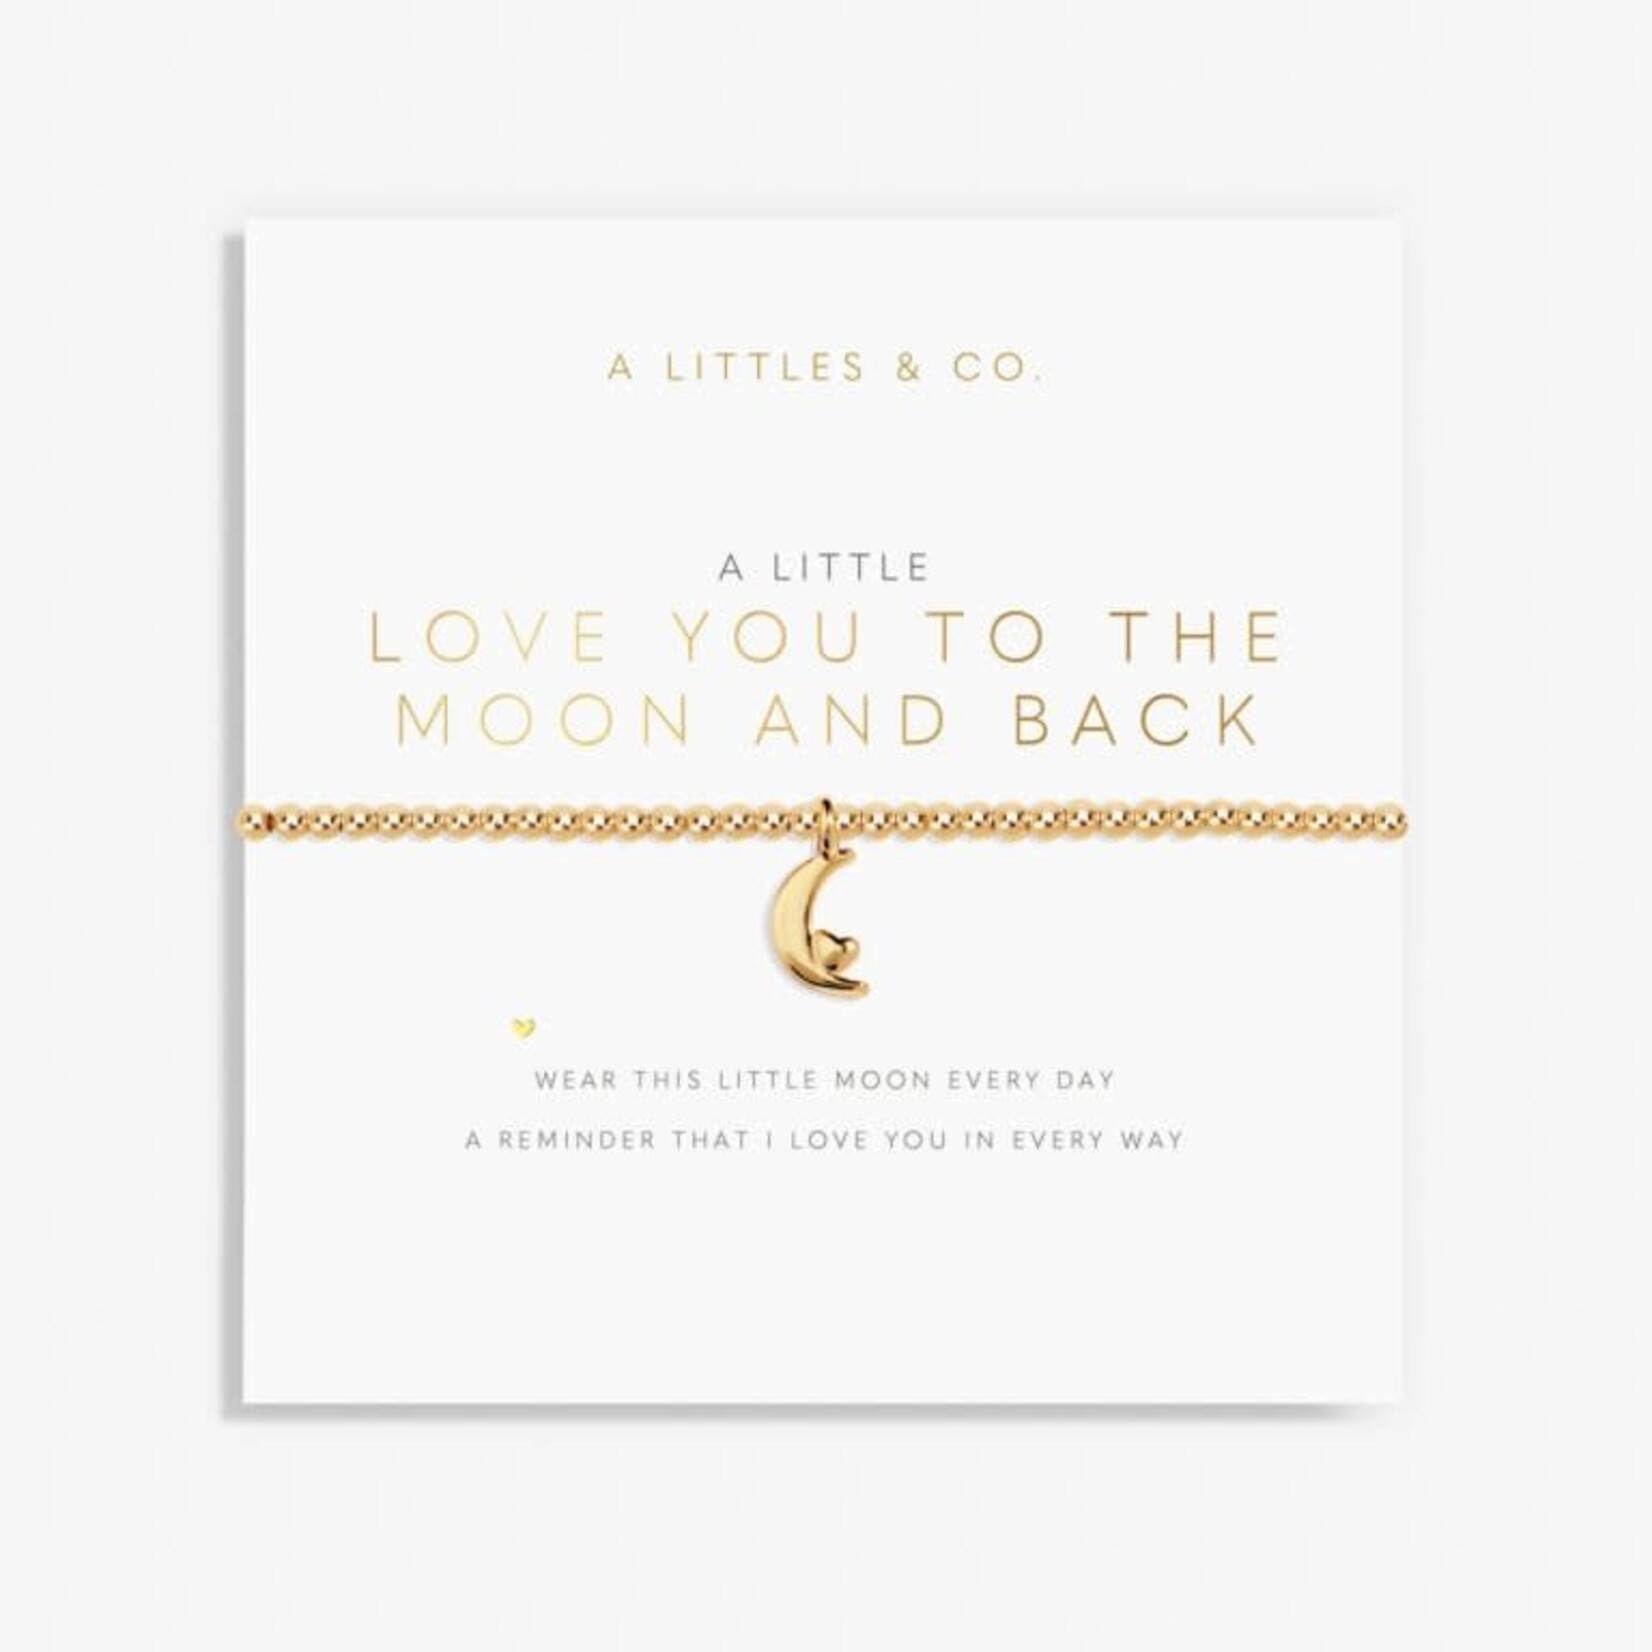 A LITTLES & CO A LITTLE LOVE YOU TO THE MOON AND BACK GOLD BRACELET